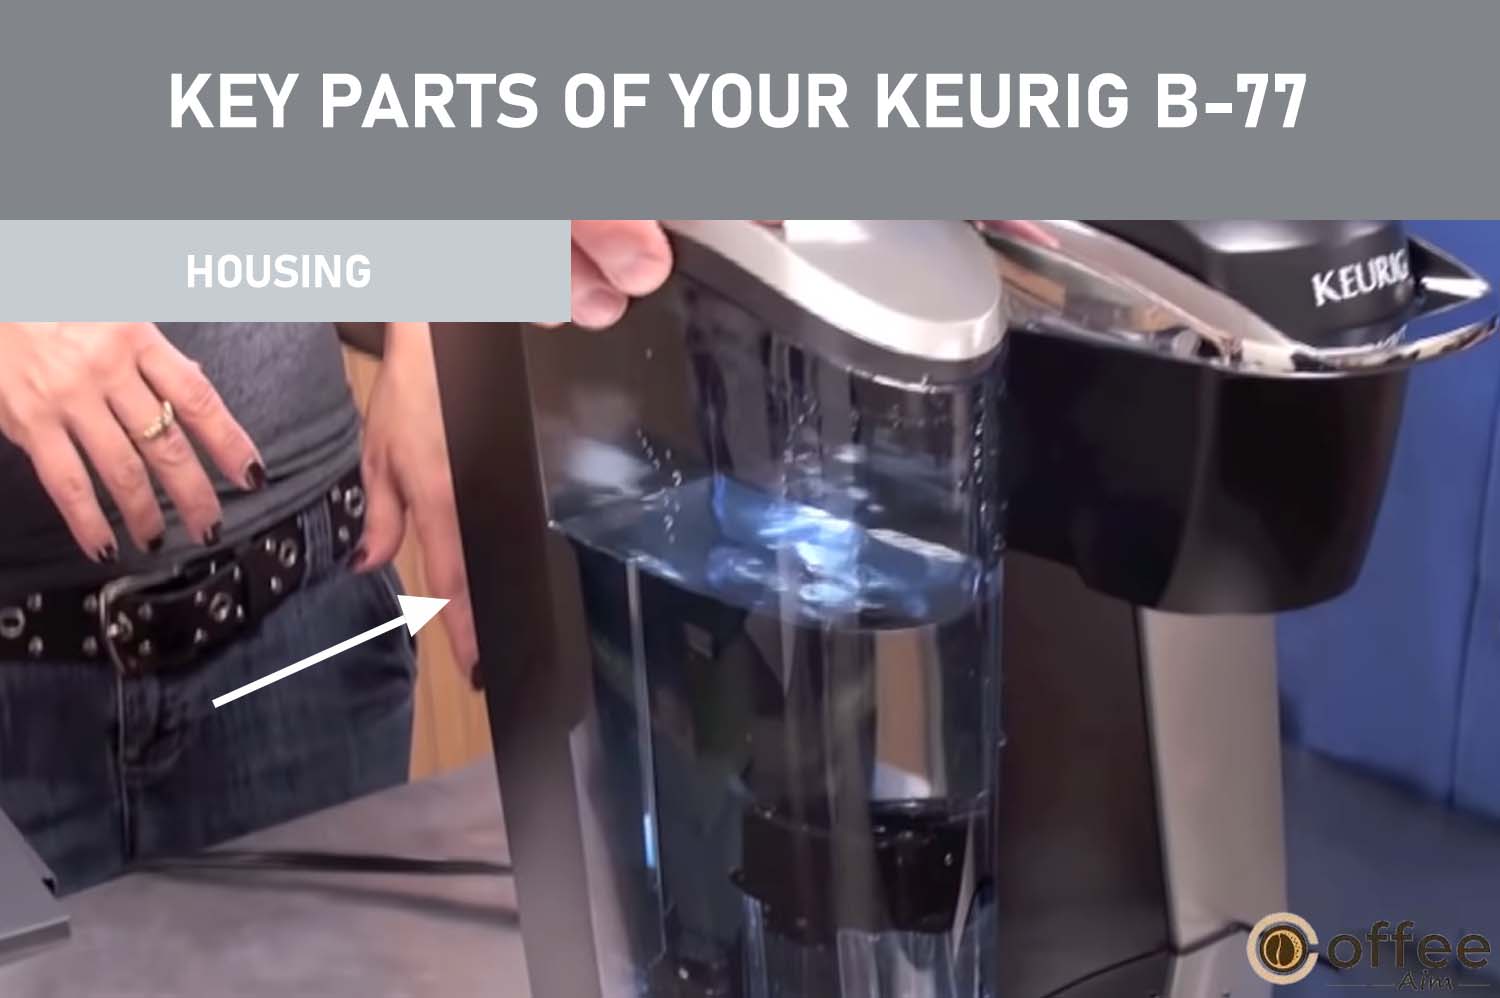 The housing in the Keurig B-77 coffee maker is the protective outer shell encasing and safeguarding the internal components of the machine.